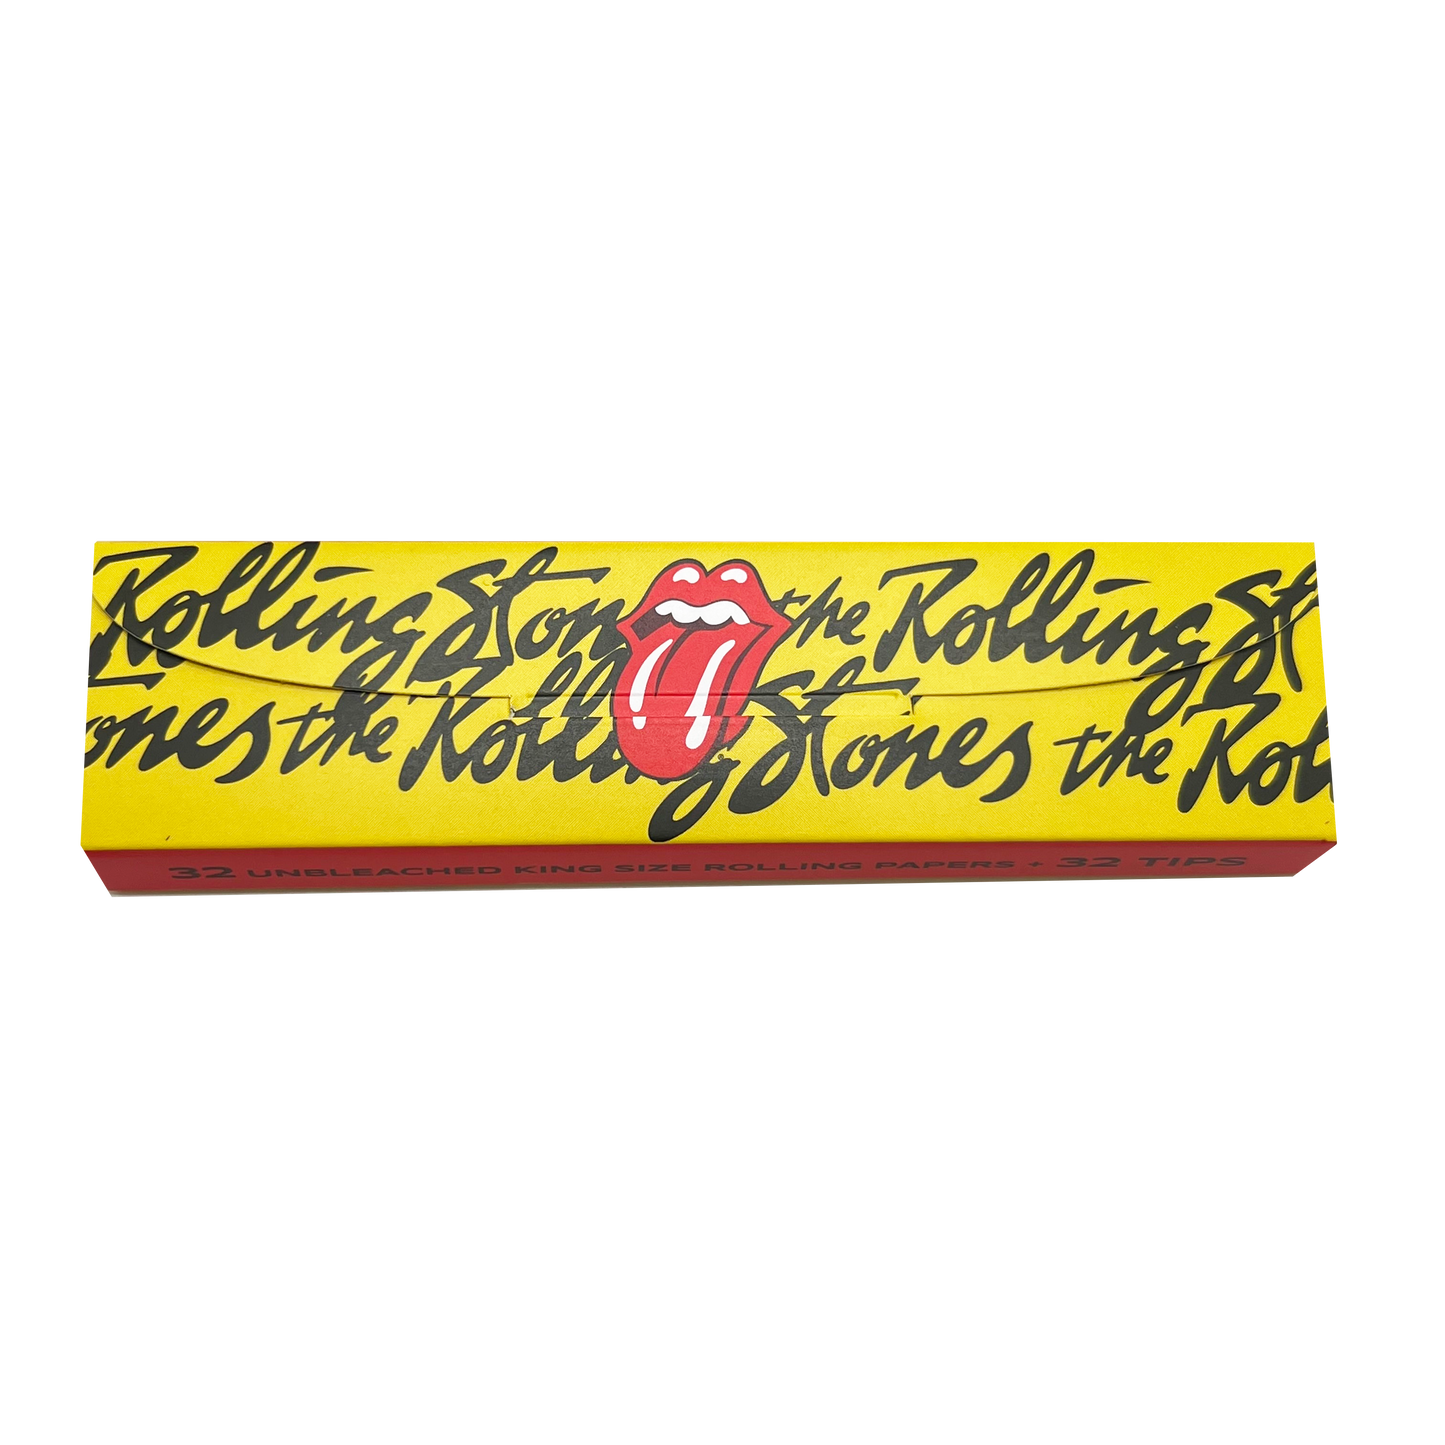 UNBLEACHED KING SIZE ROLLING STONES CON FILTROS